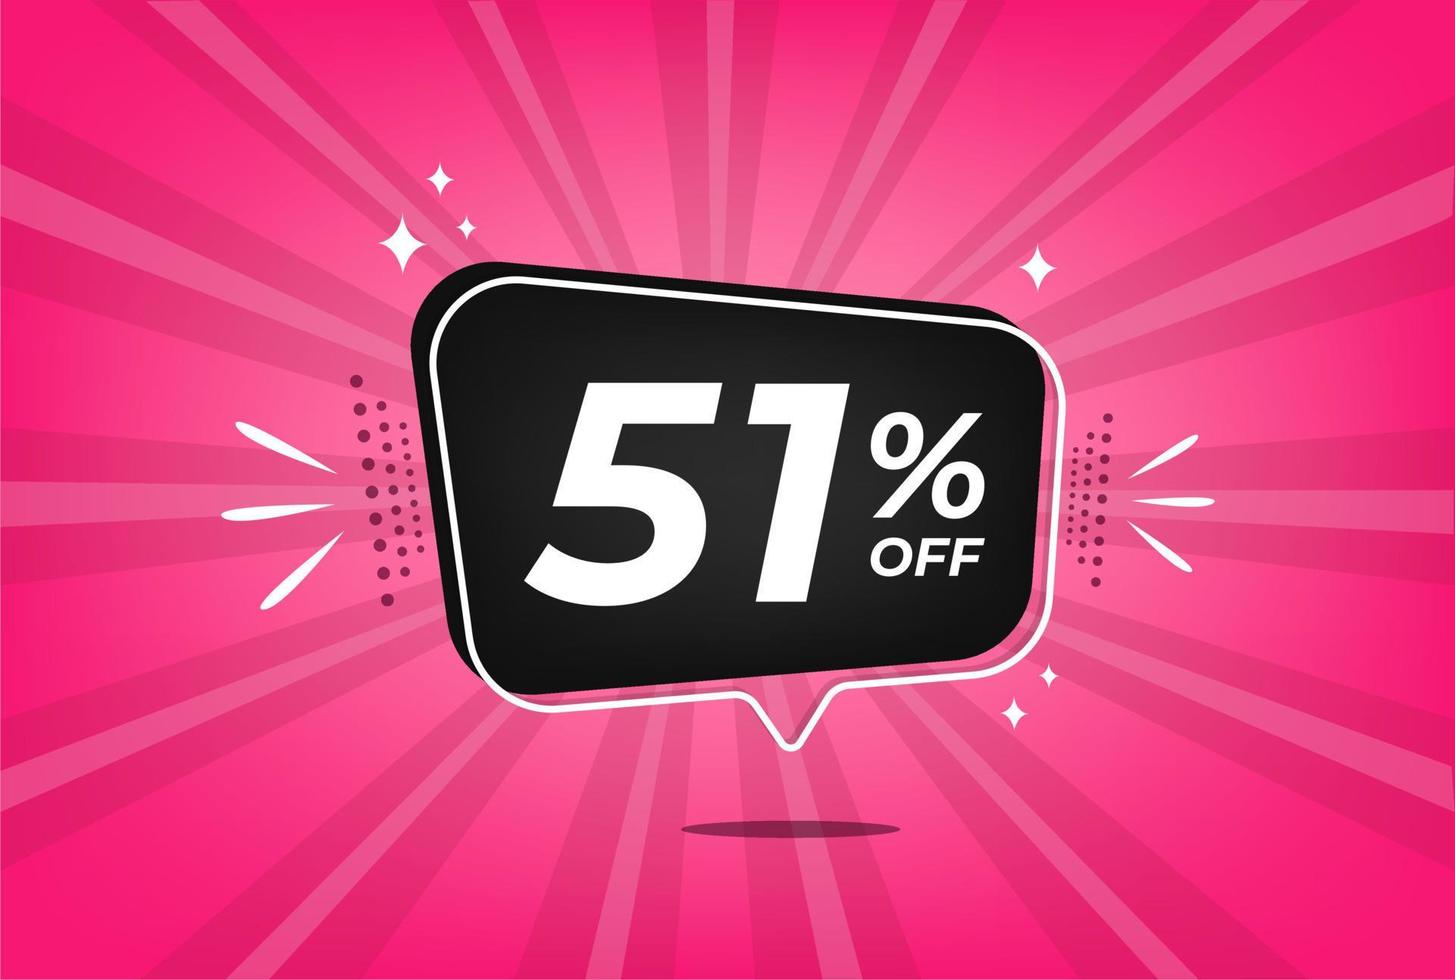 51 percent discount. Pink banner with floating balloon for promotions and offers. vector